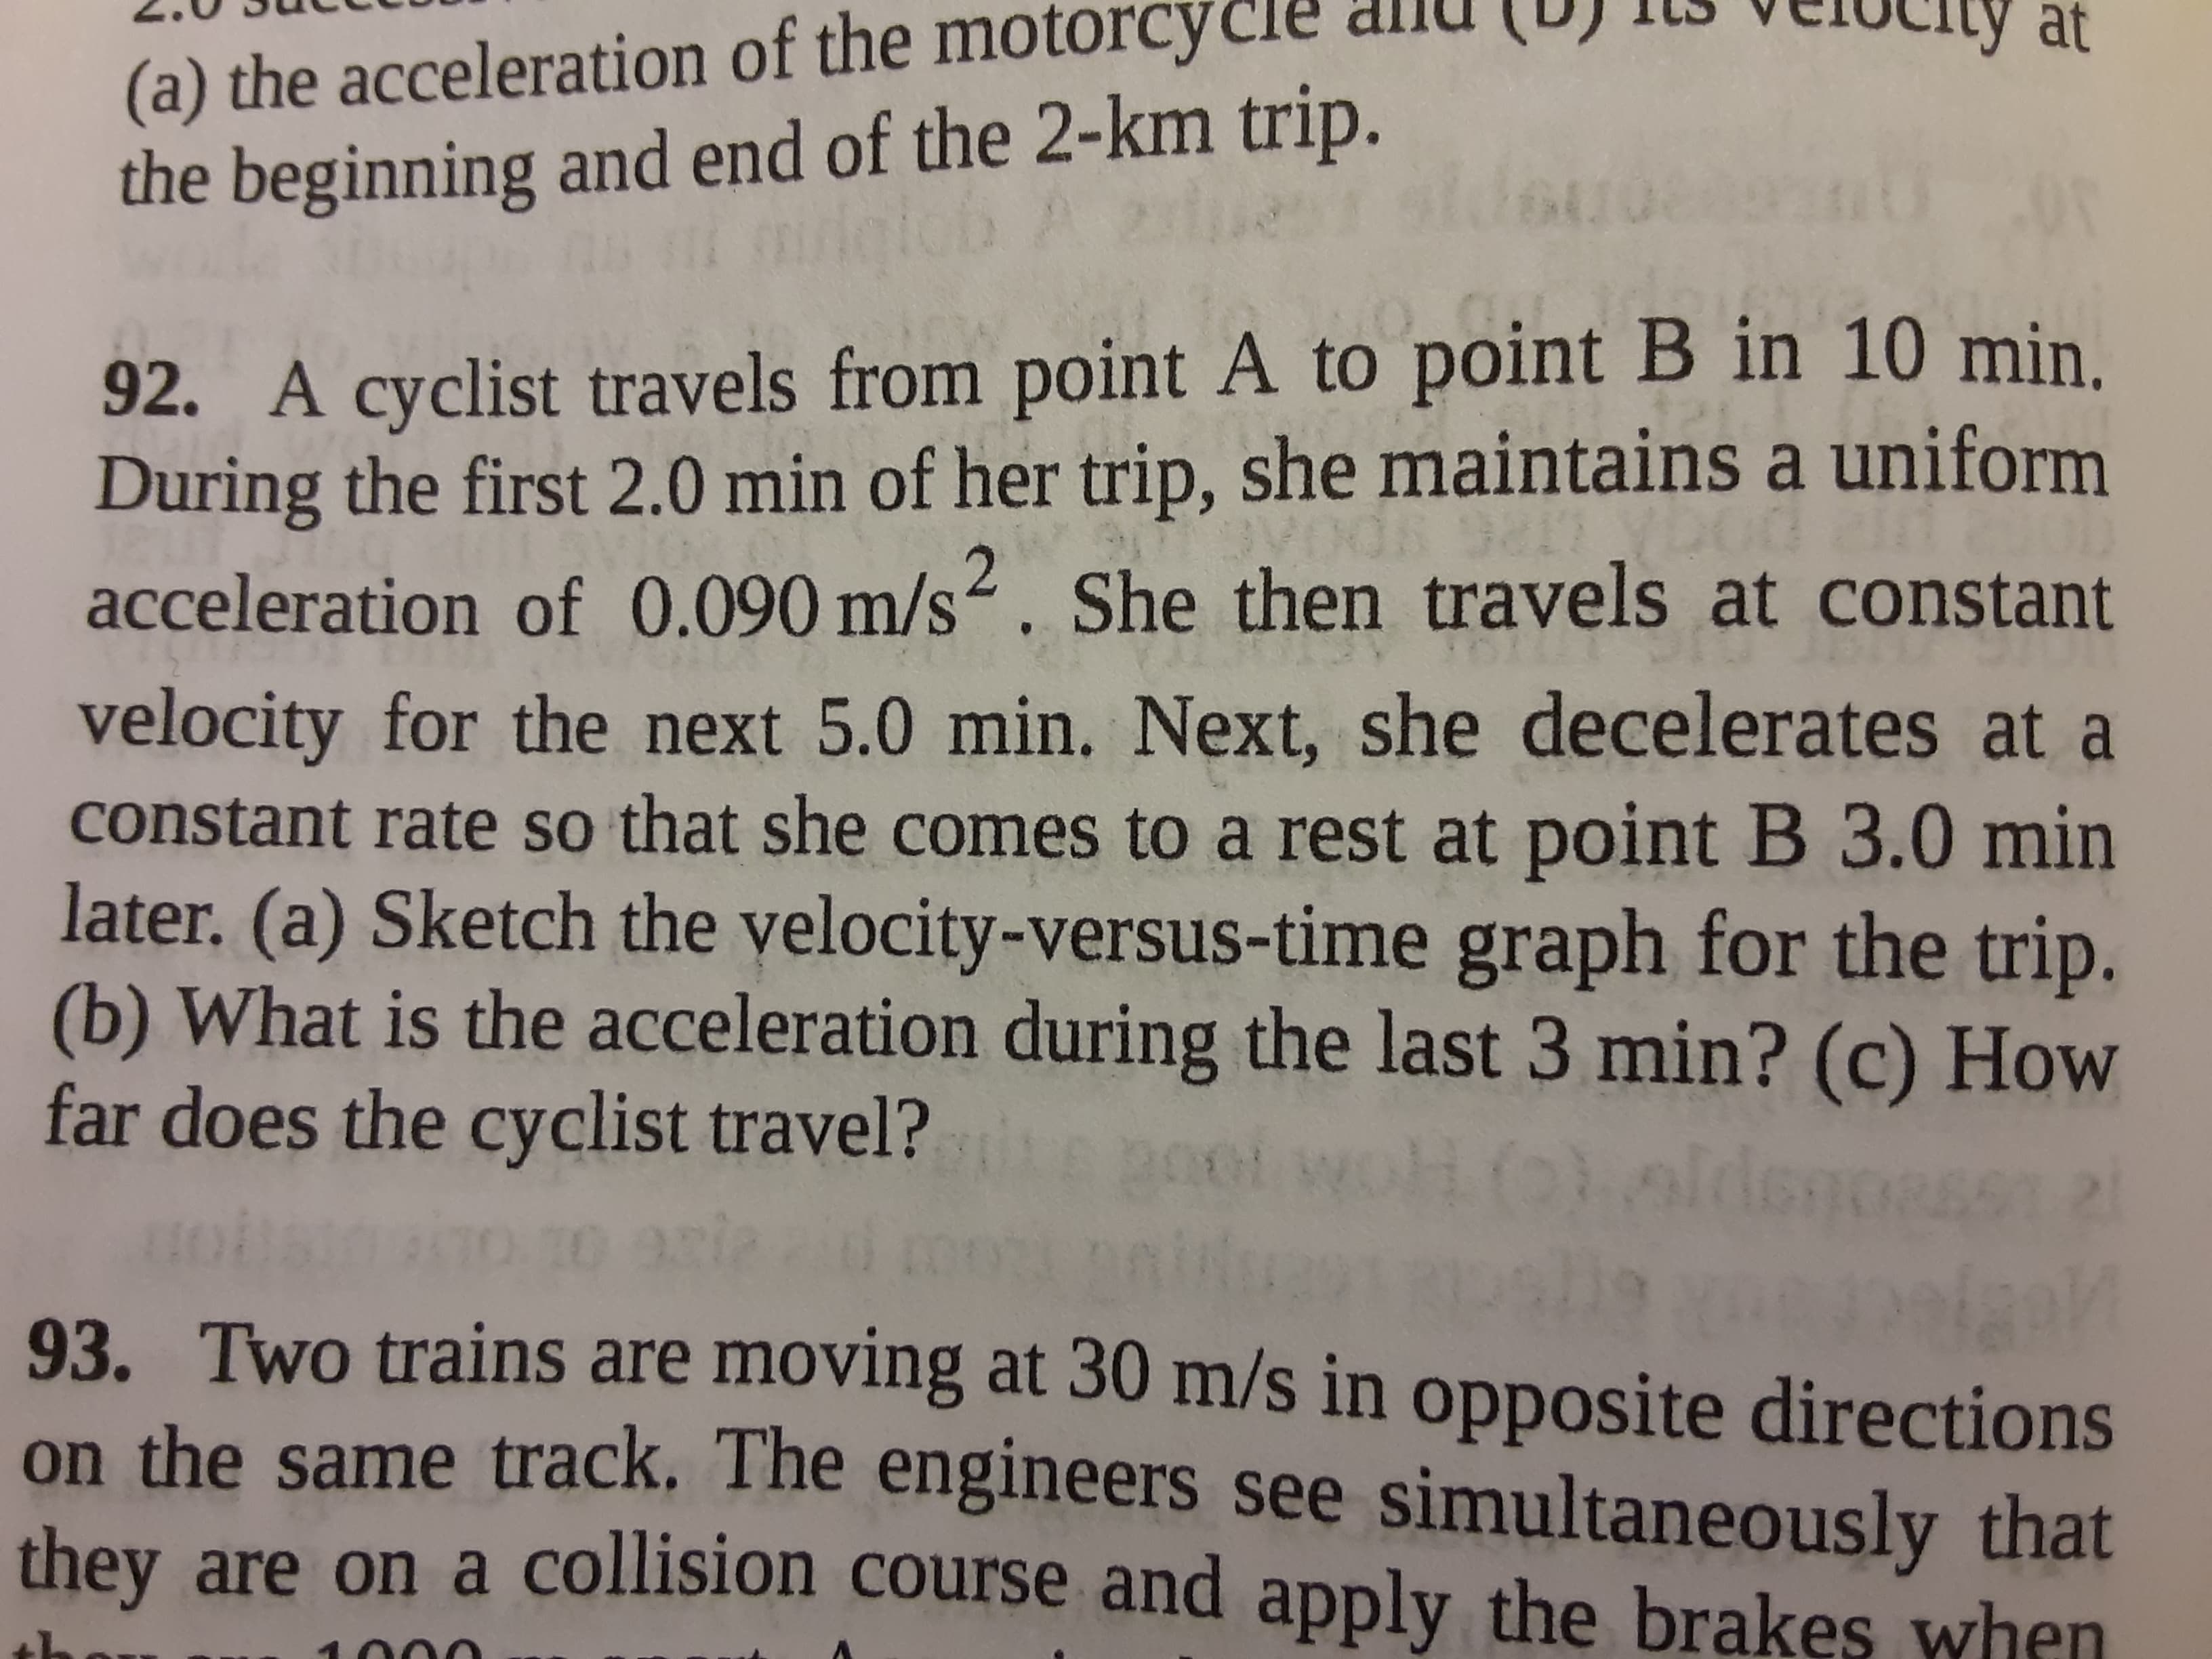 92. A cyclist travels from point A to point B in 10 min.
During the first 2.0 min of her trip, she maintains a uniform
acceleration of 0.090 m/s2. She then travels at constant
velocity for the next 5.0 min. Next, she decelerates at a
constant rate so that she comes to a rest at point B 3.0 min
later. (a) Sketch the yelocity-versus-time graph for the trip.
(b) What is the acceleration during the last 3 min? (c) How
far does the cyclist travel?
